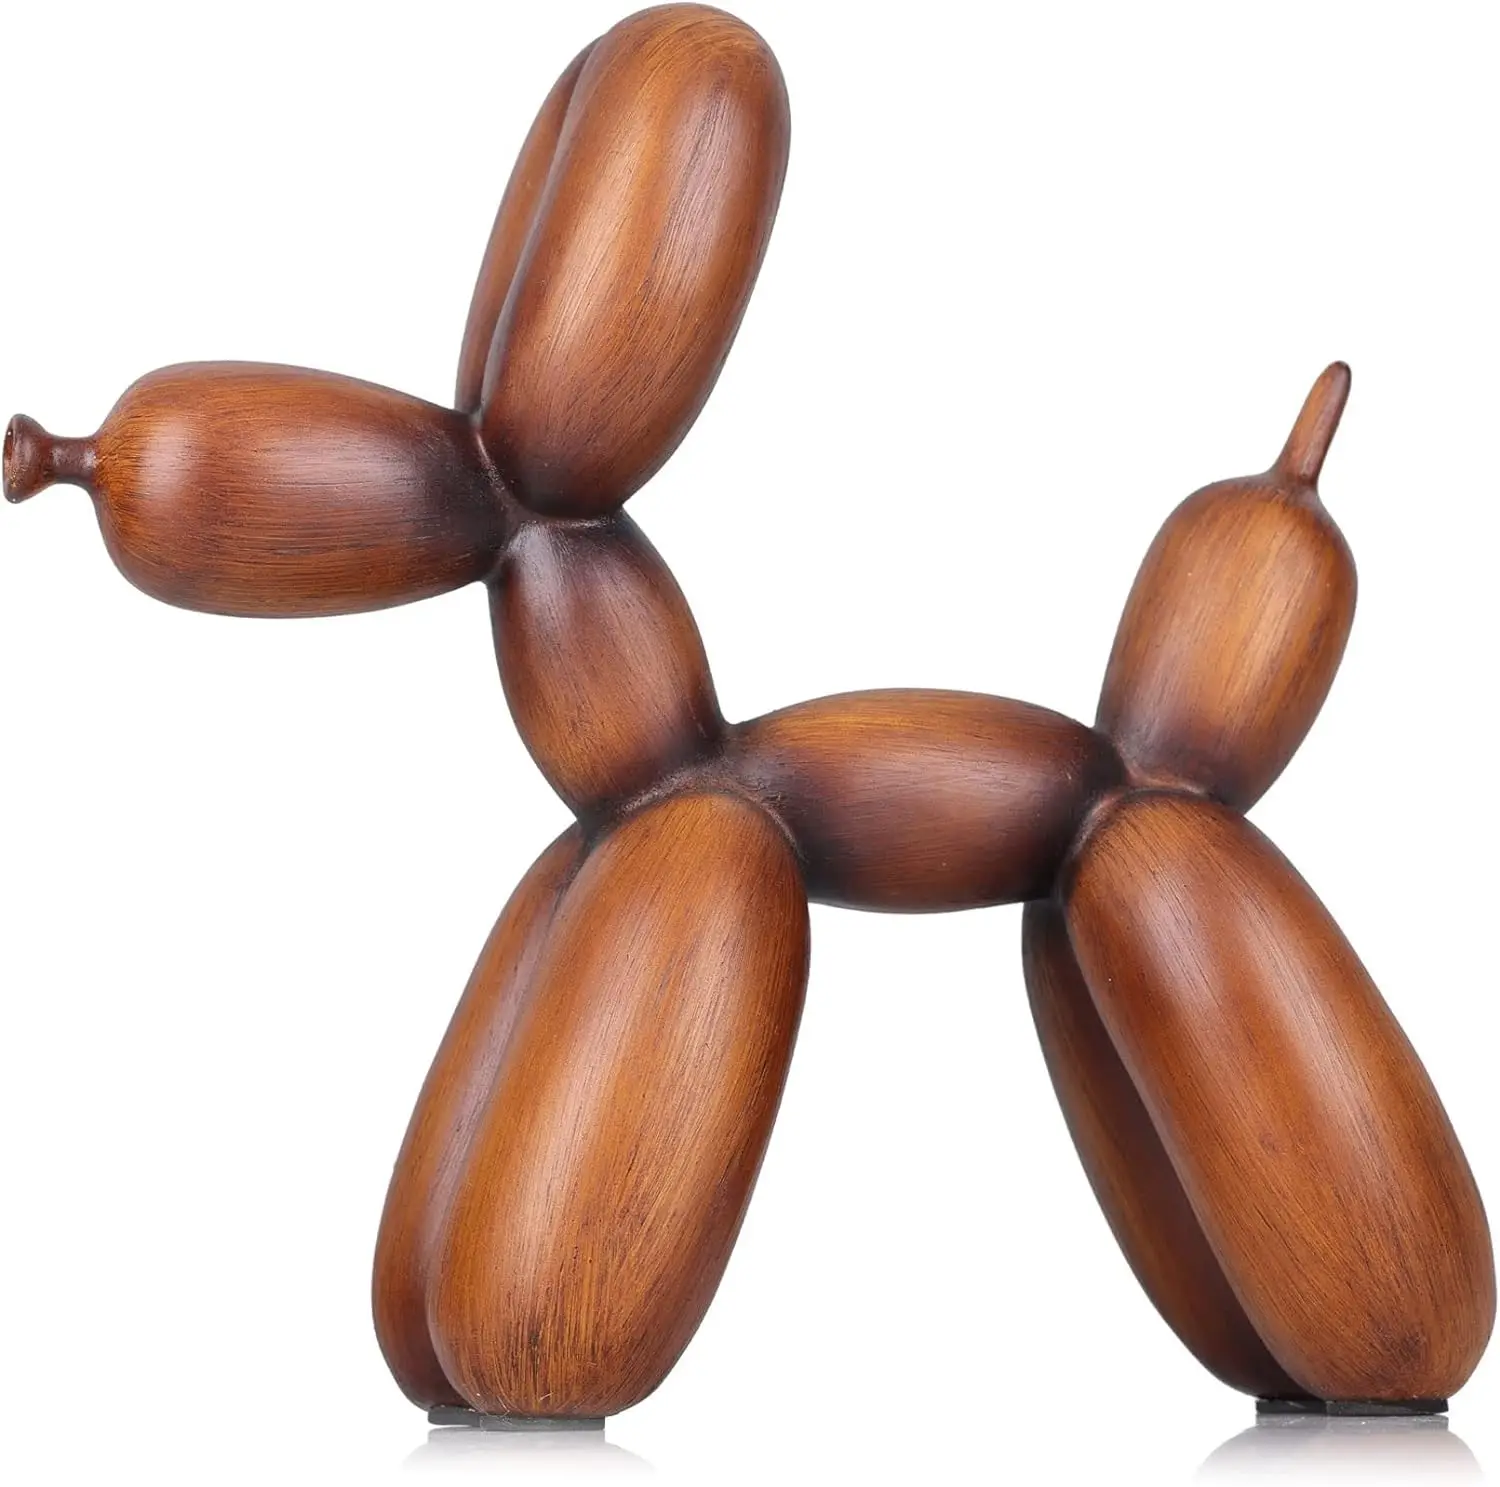 Hot selling modern Nordic resin wood grain balloon dogs for hotel decoration and gifts